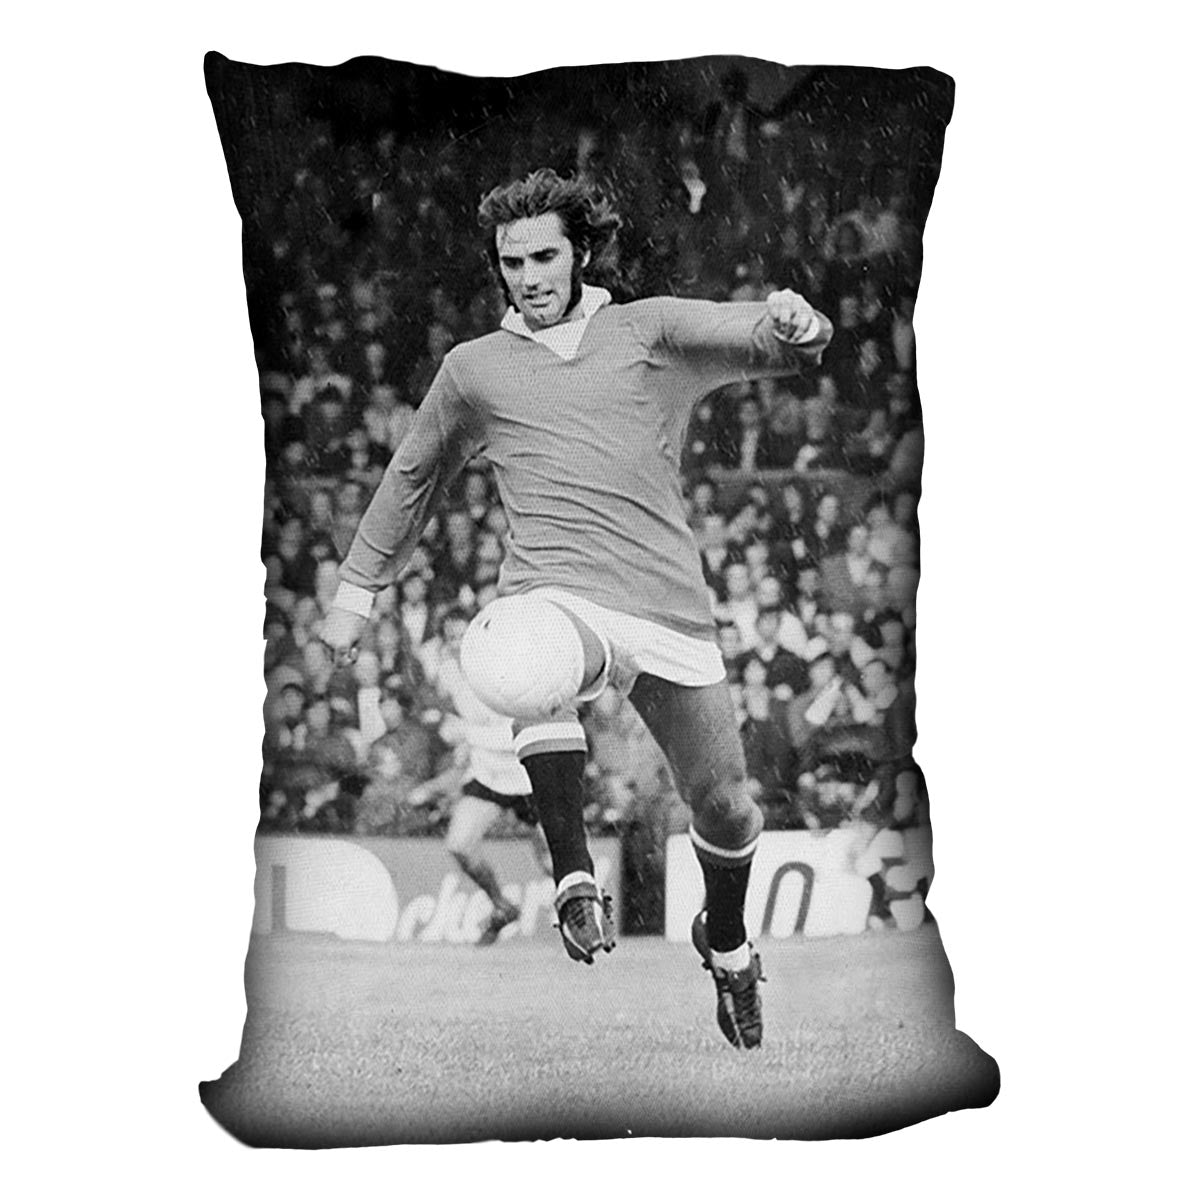 George Best Manchester United in 1971 Cushion